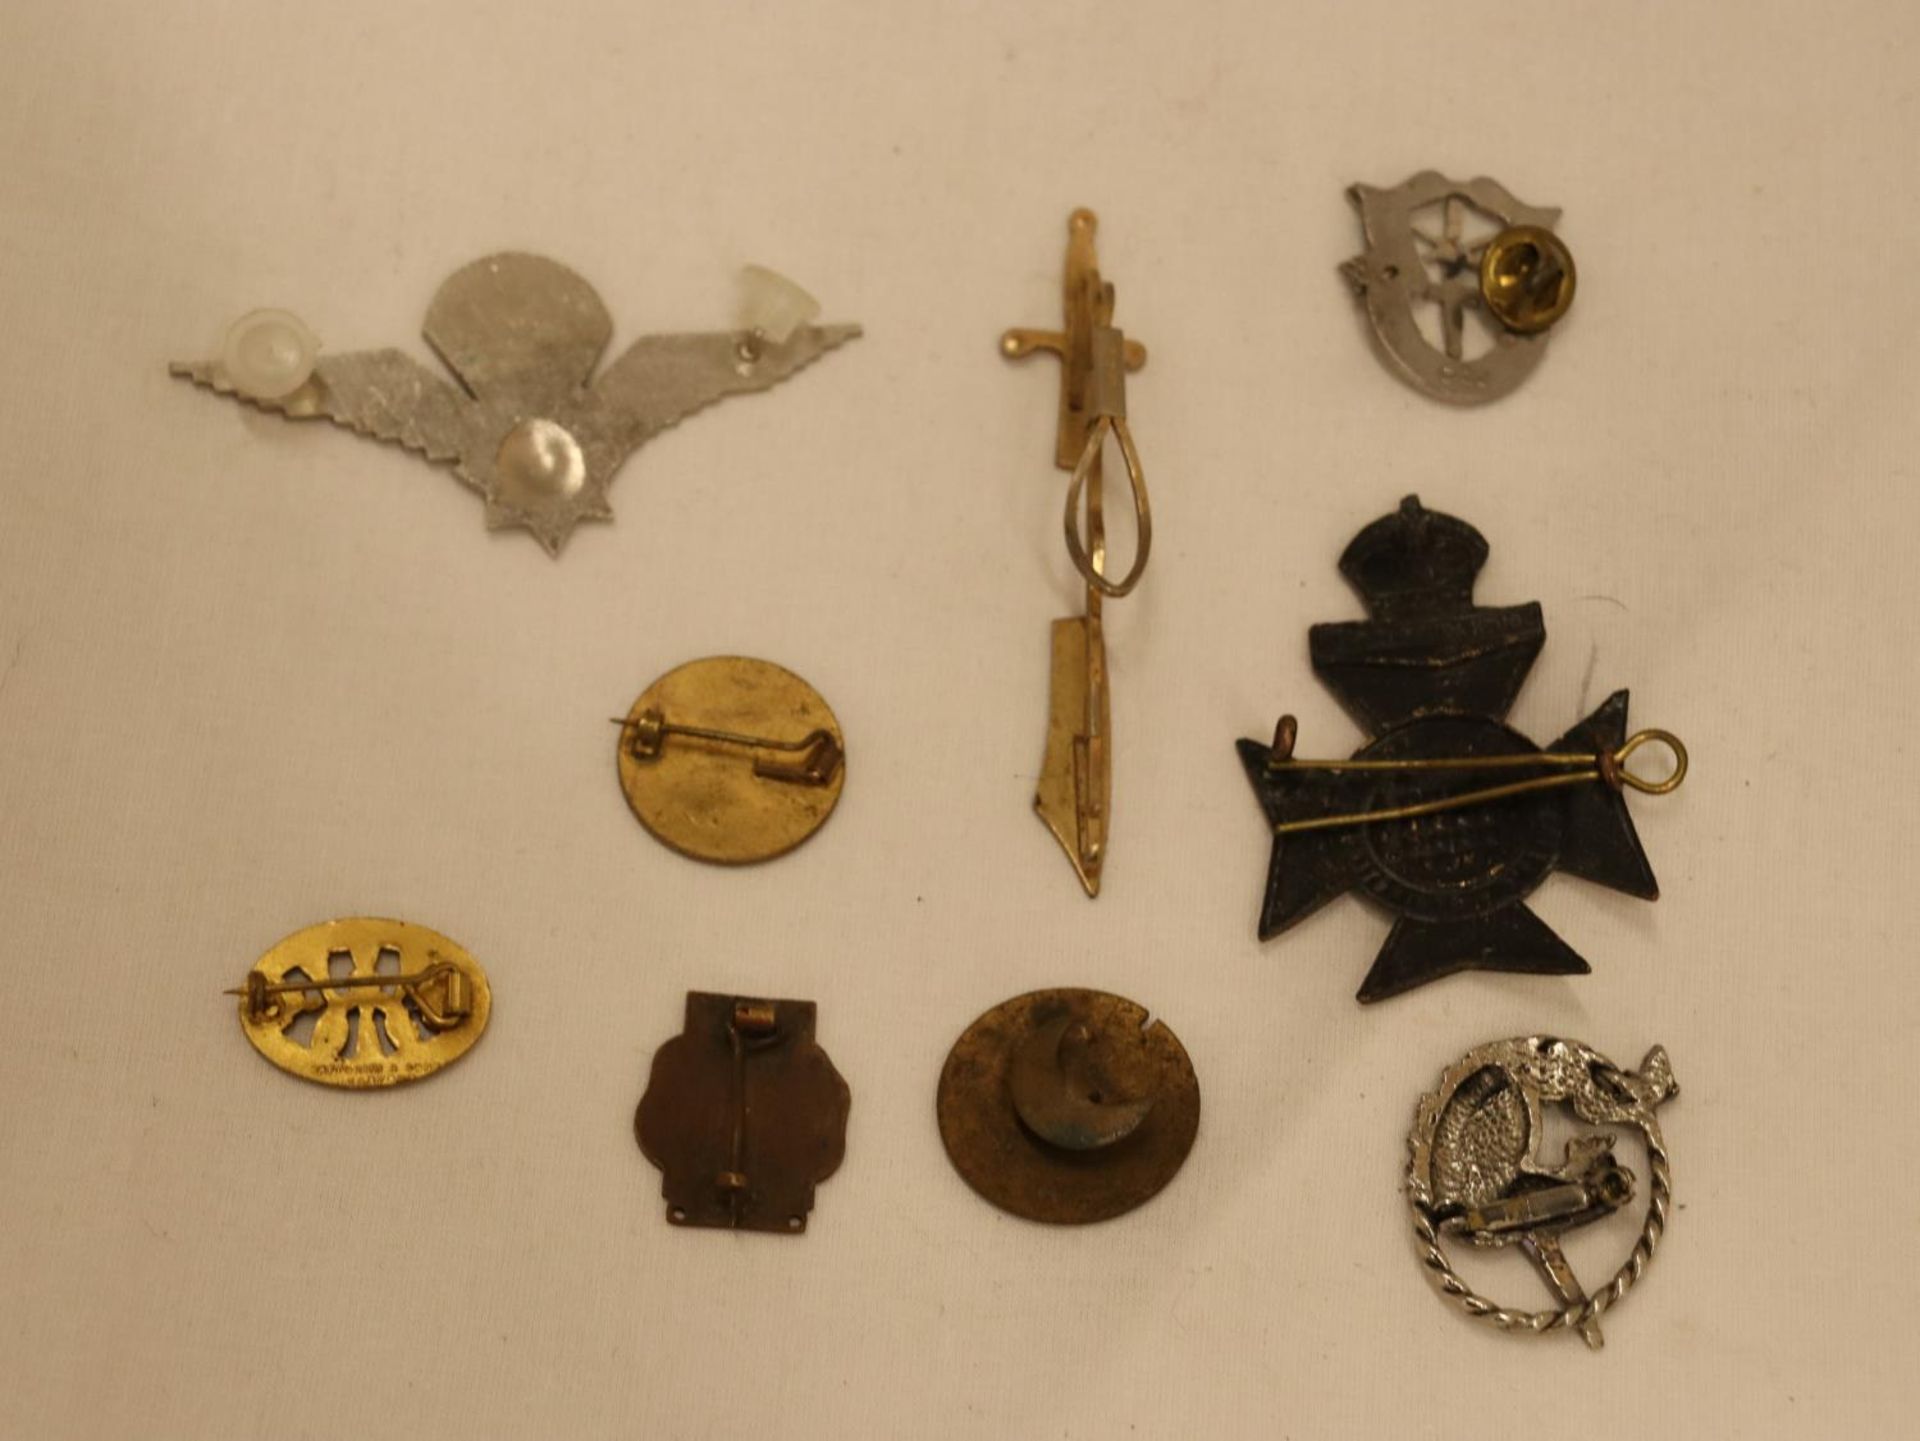 ACOLLECTION OF VINTAGE BADGES TO INCLUDE MILITARIA - 9 IN TOTAL - Image 5 of 5